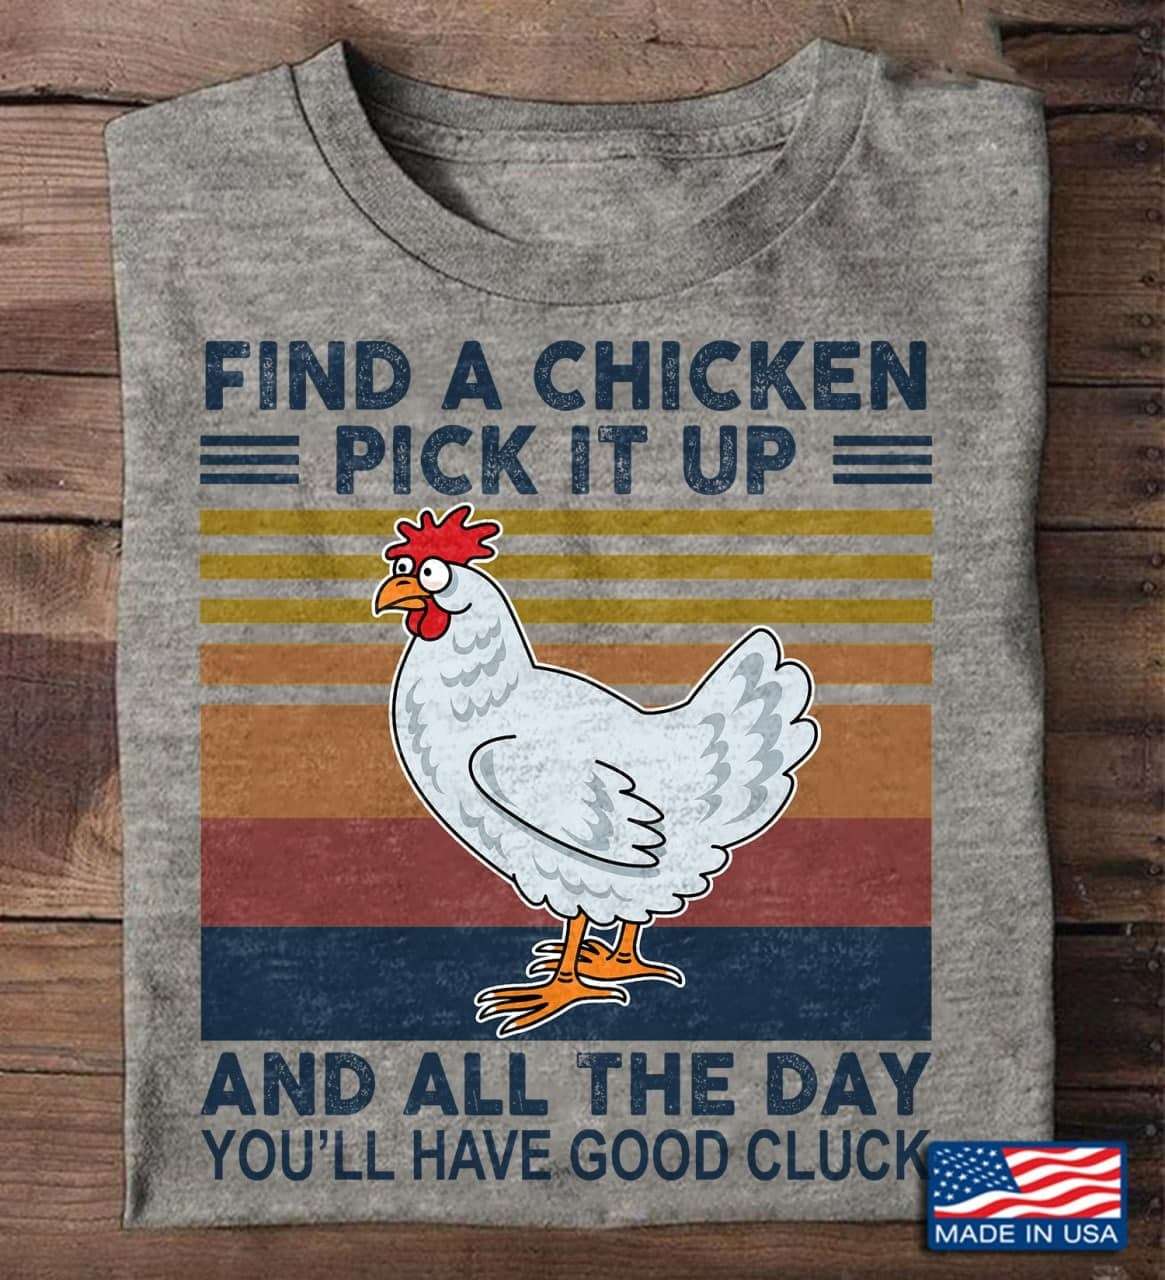 Find a chicken, pick it up and all the day you'll have good cluck - Chicken good cluck animal